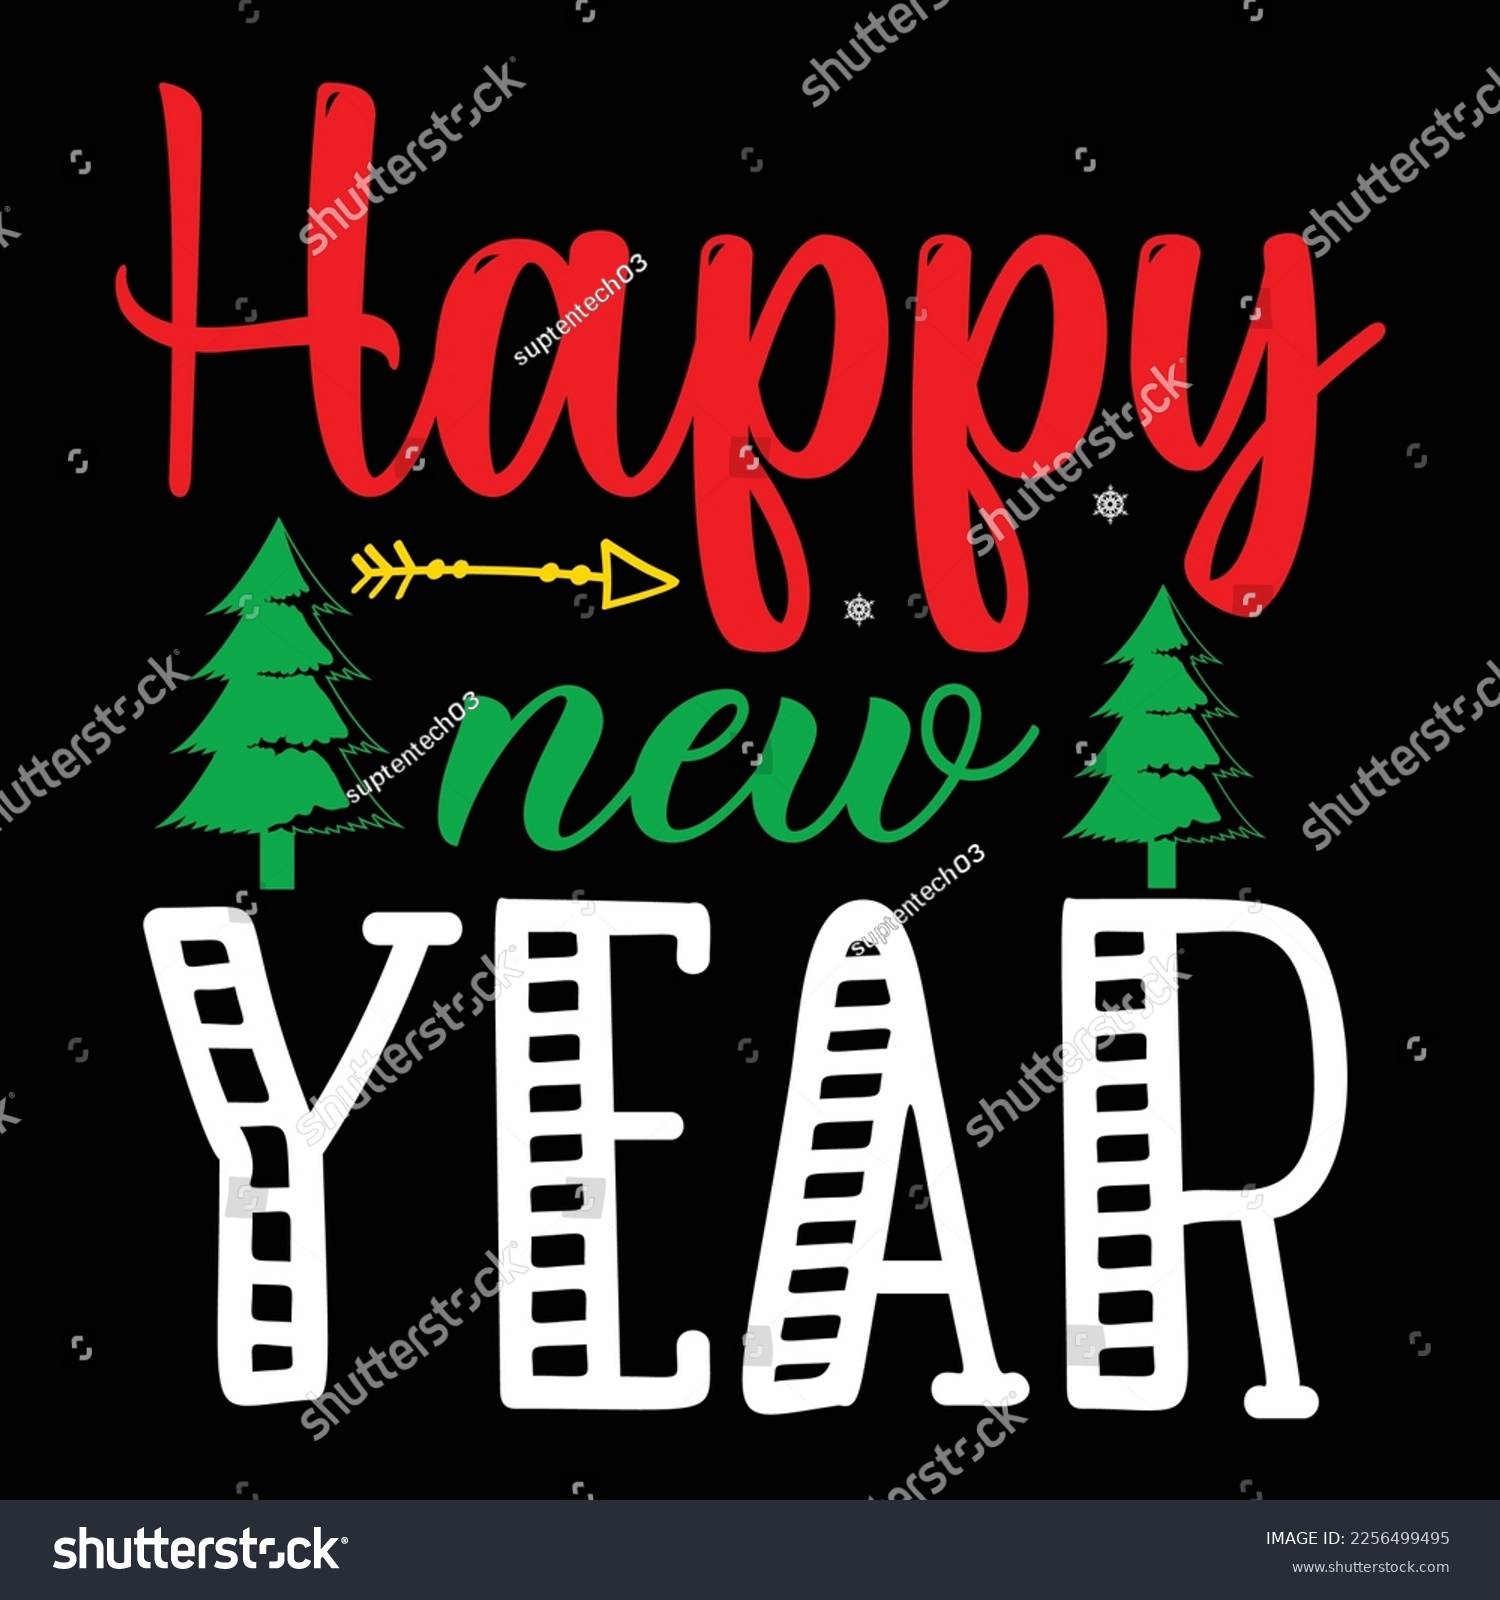 SVG of Happy new Year, Merry Christmas shirts Print Template, Xmas Ugly Snow Santa Clouse New Year Holiday Candy Santa Hat vector illustration for Christmas hand lettered svg